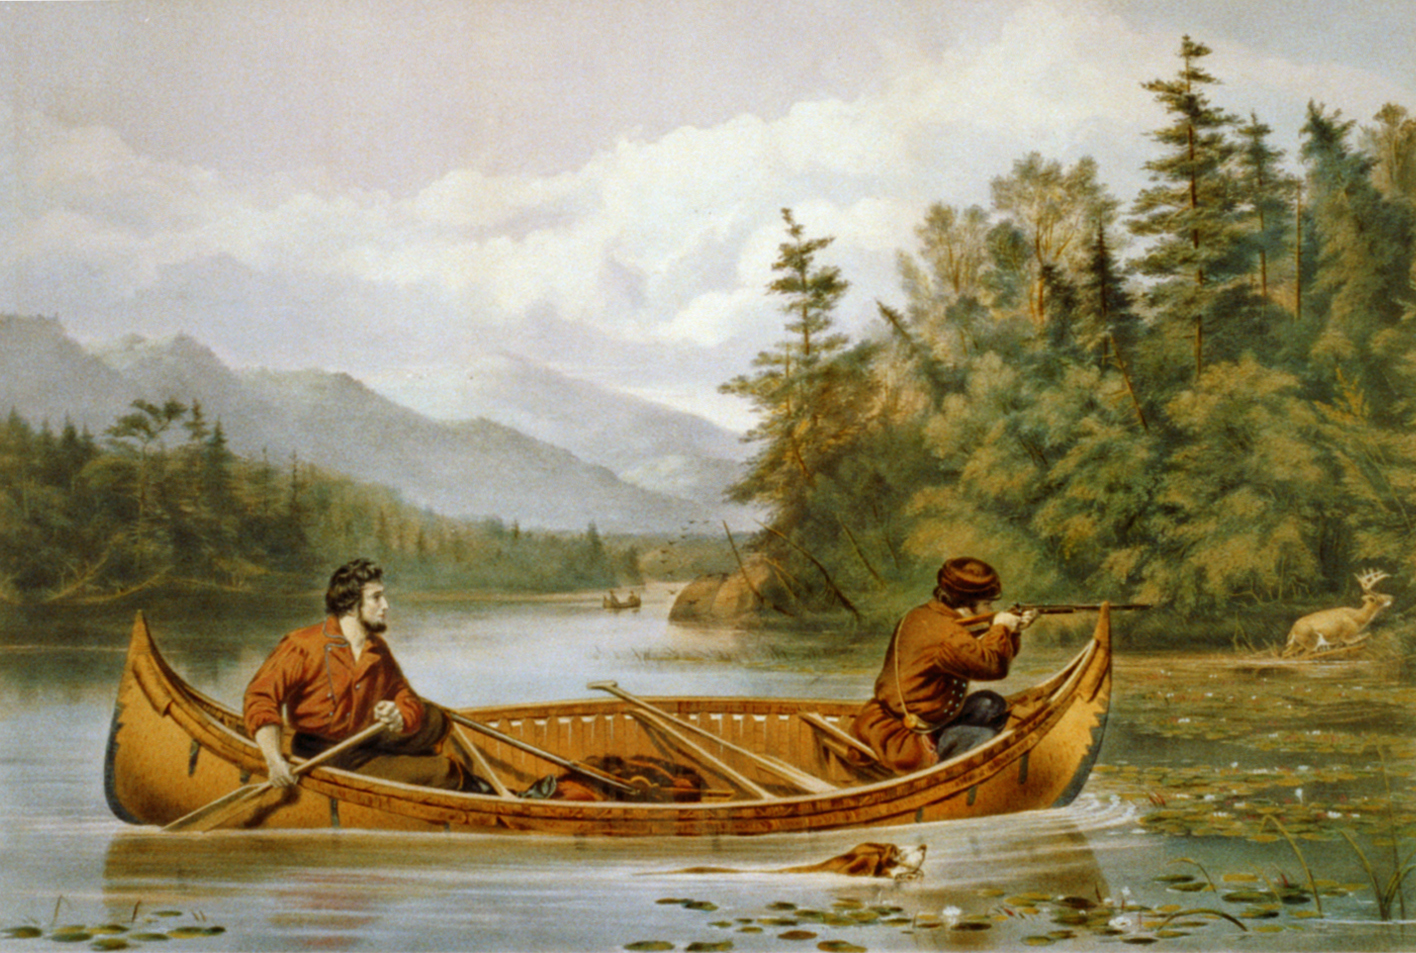 LOC-Currier-and-Ives-hunting-scene.jpg